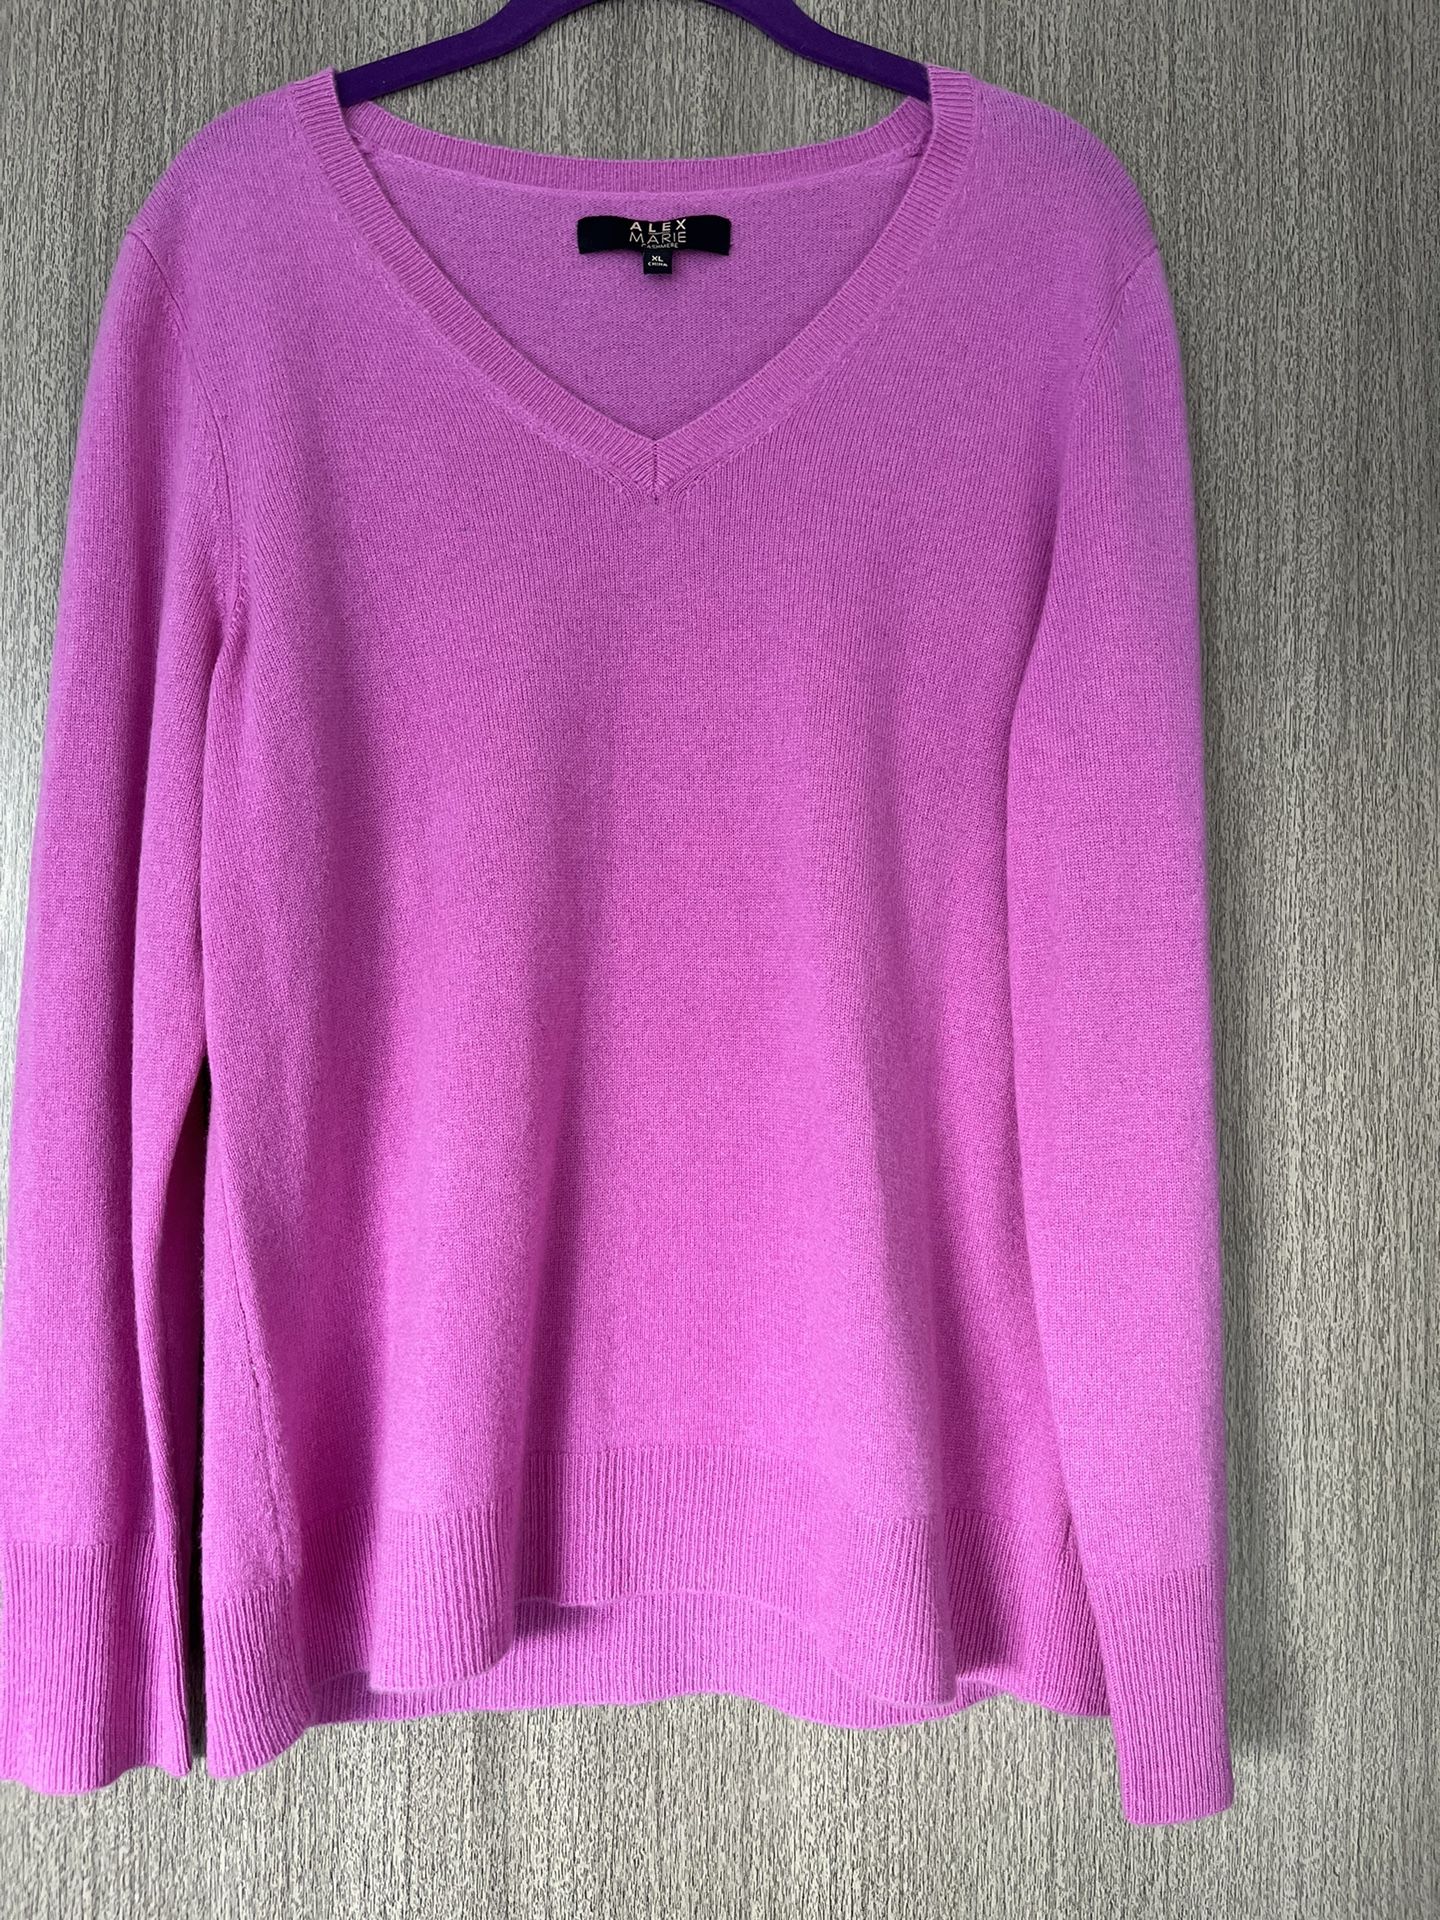 Women’s  Lilac Colored Cashmere Pullover Sweater